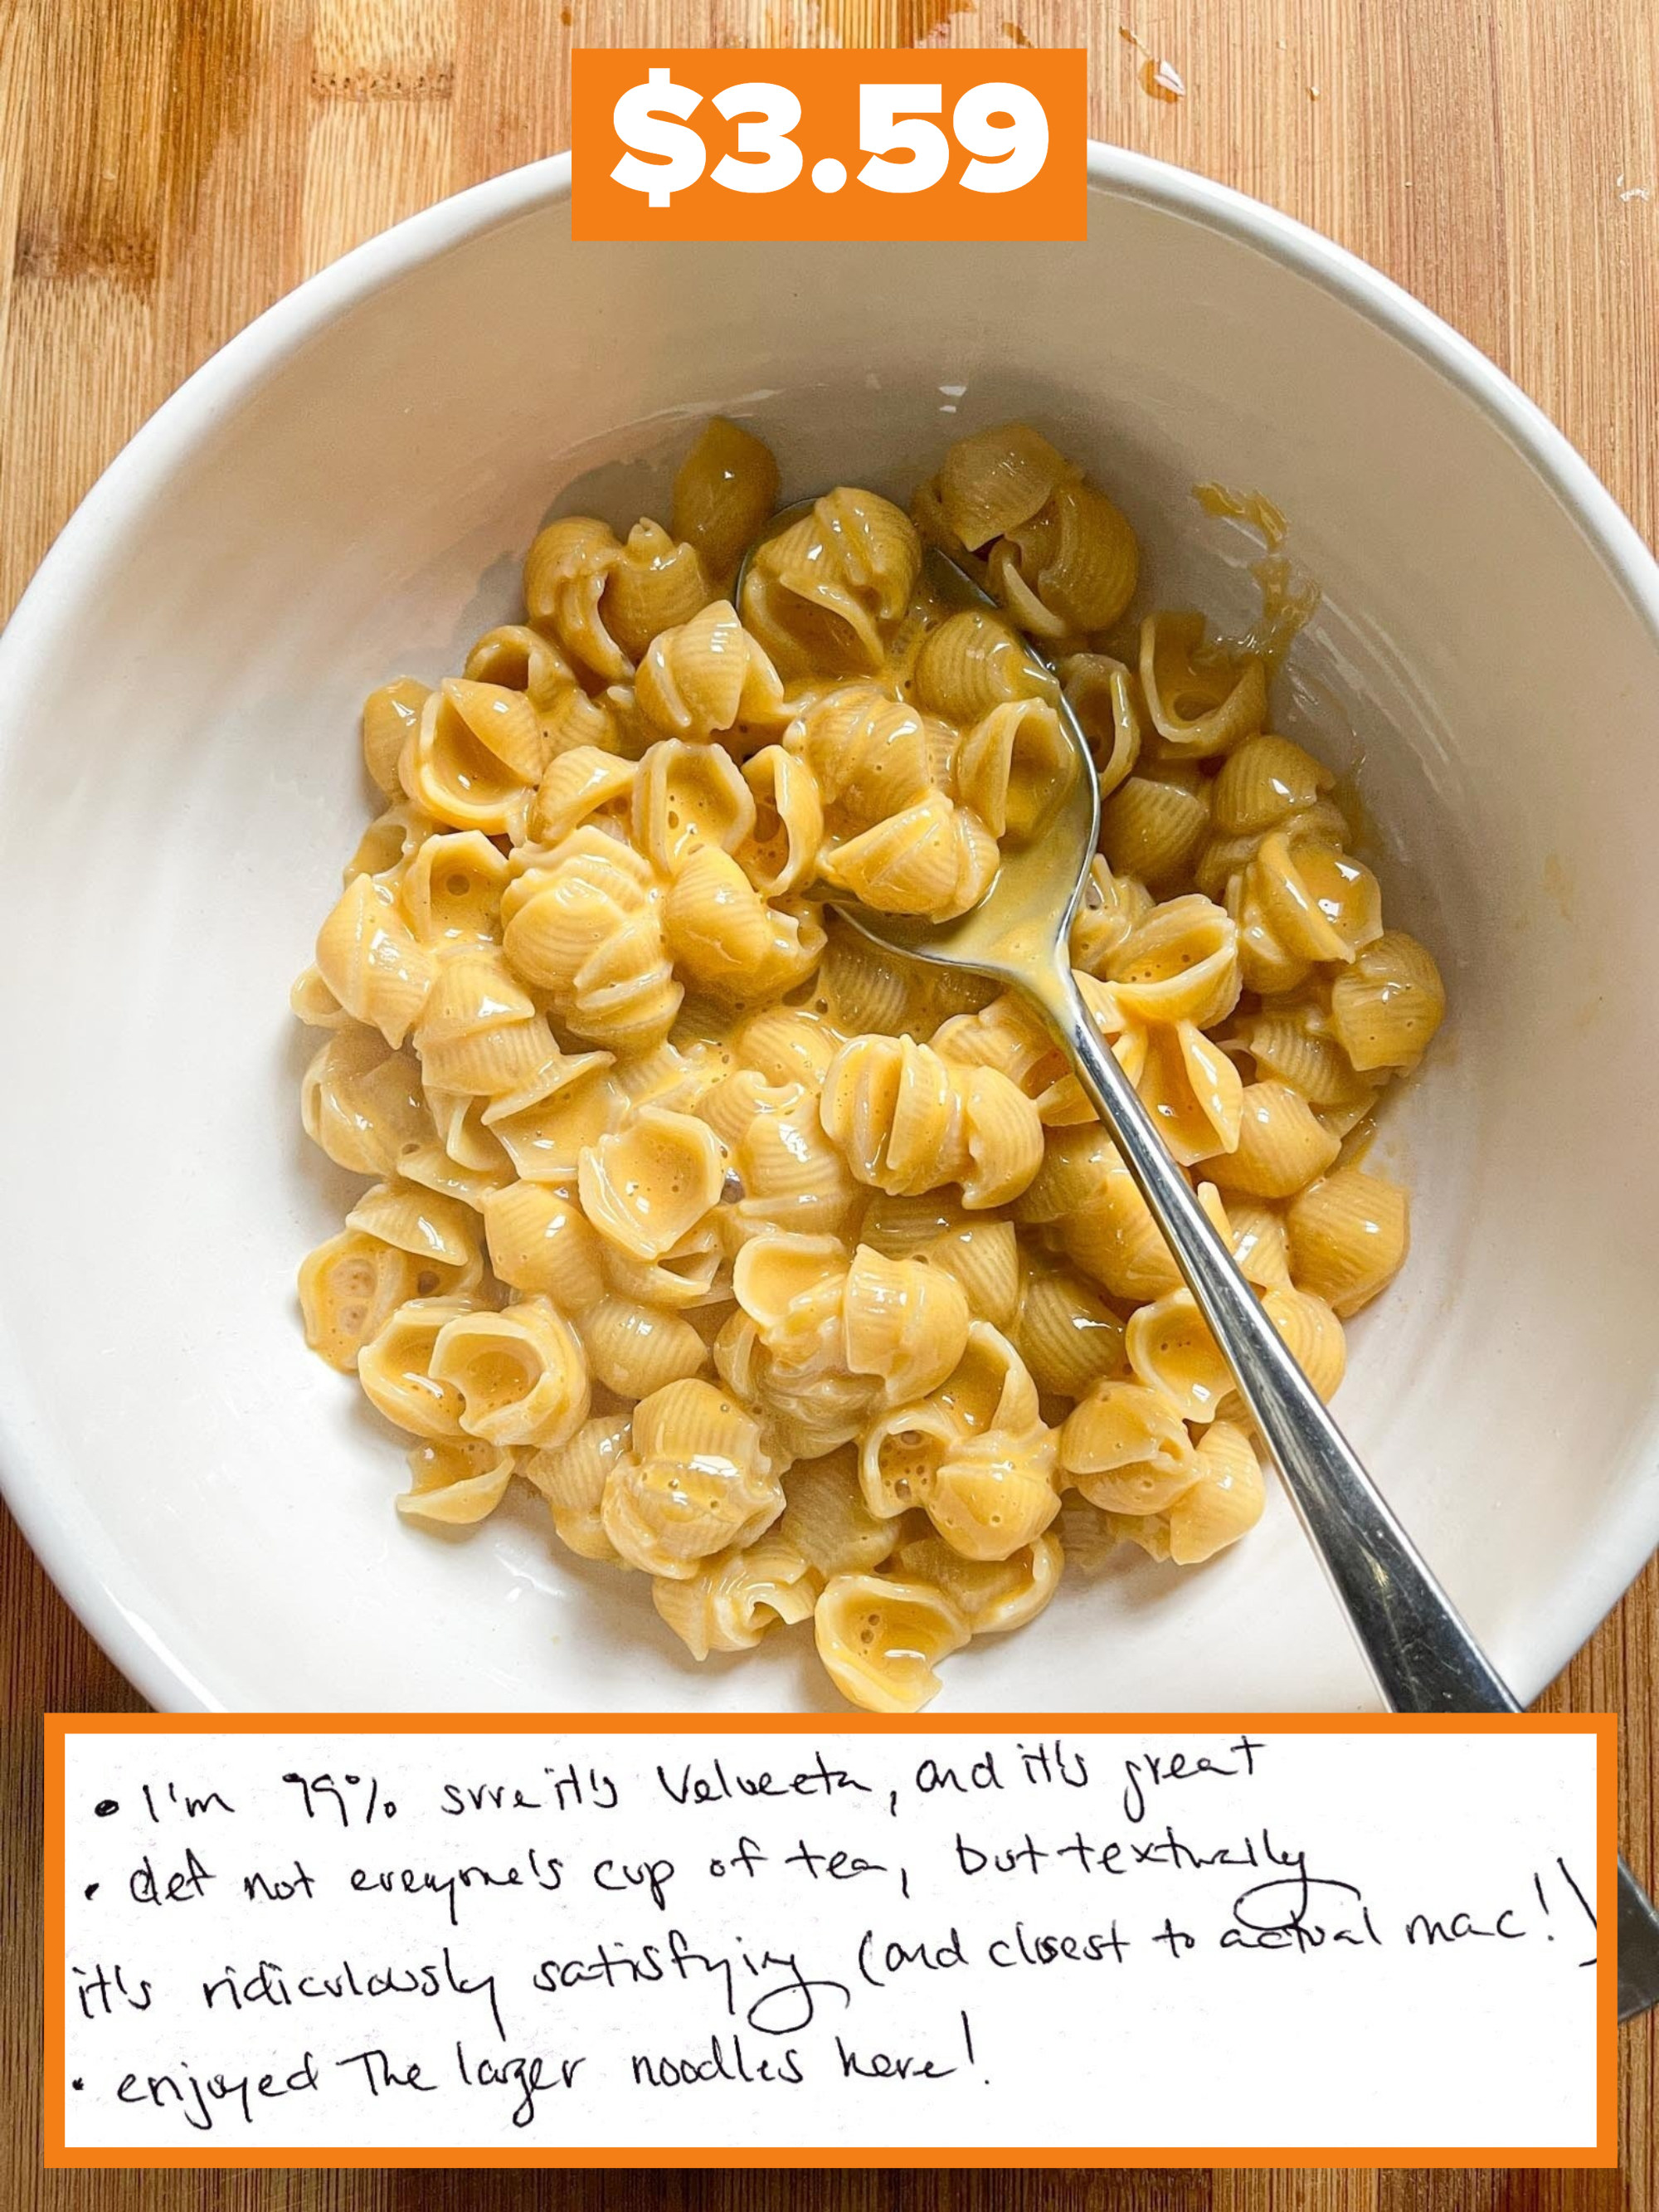 Cost: $3.59; Author&#x27;s handwritten notes at the bottom, including &quot;I&#x27;m 99% sure this is Velveeta, and it&#x27;s great&quot;